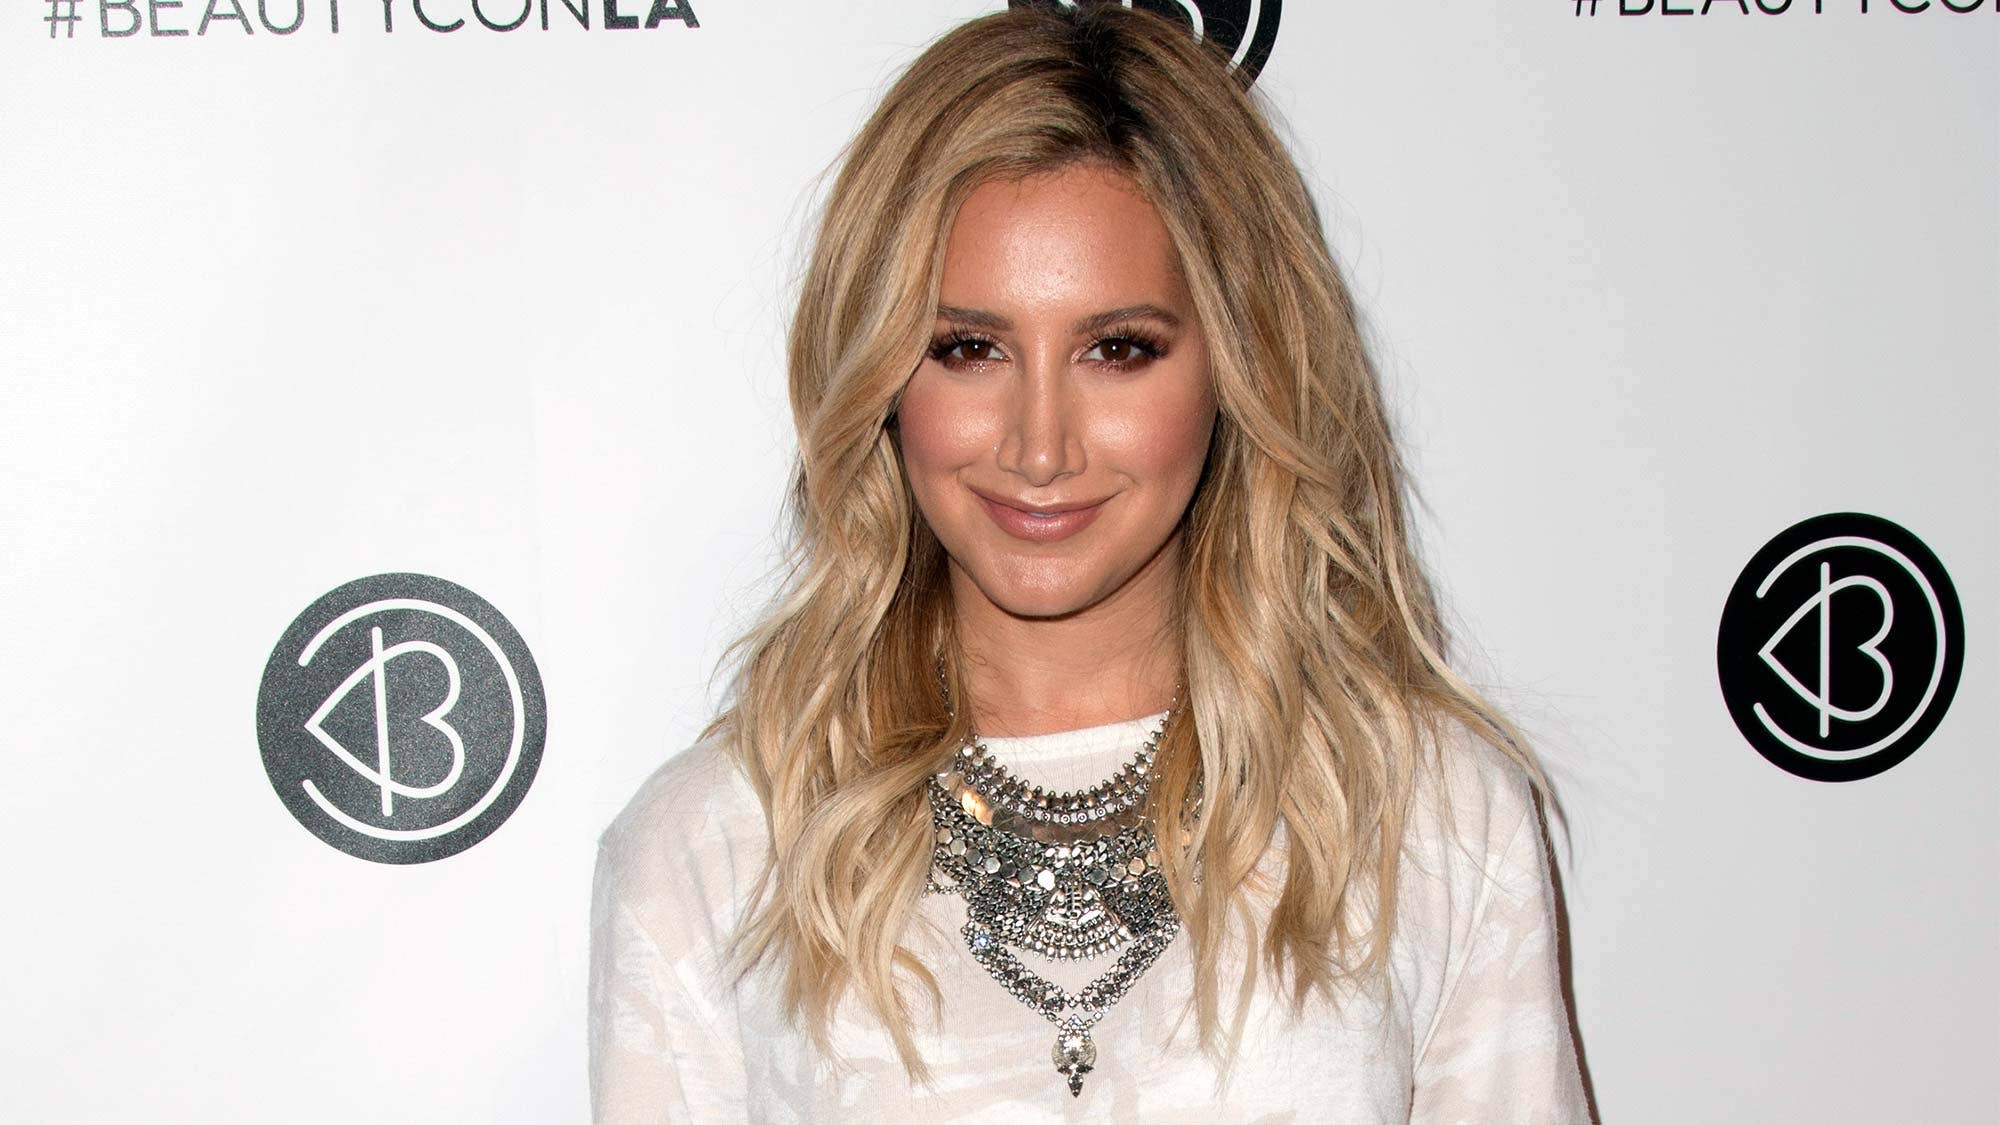 Ashley Tisdale says she was ’embarrassed’ by a nose job: ‘I was examined, judged’